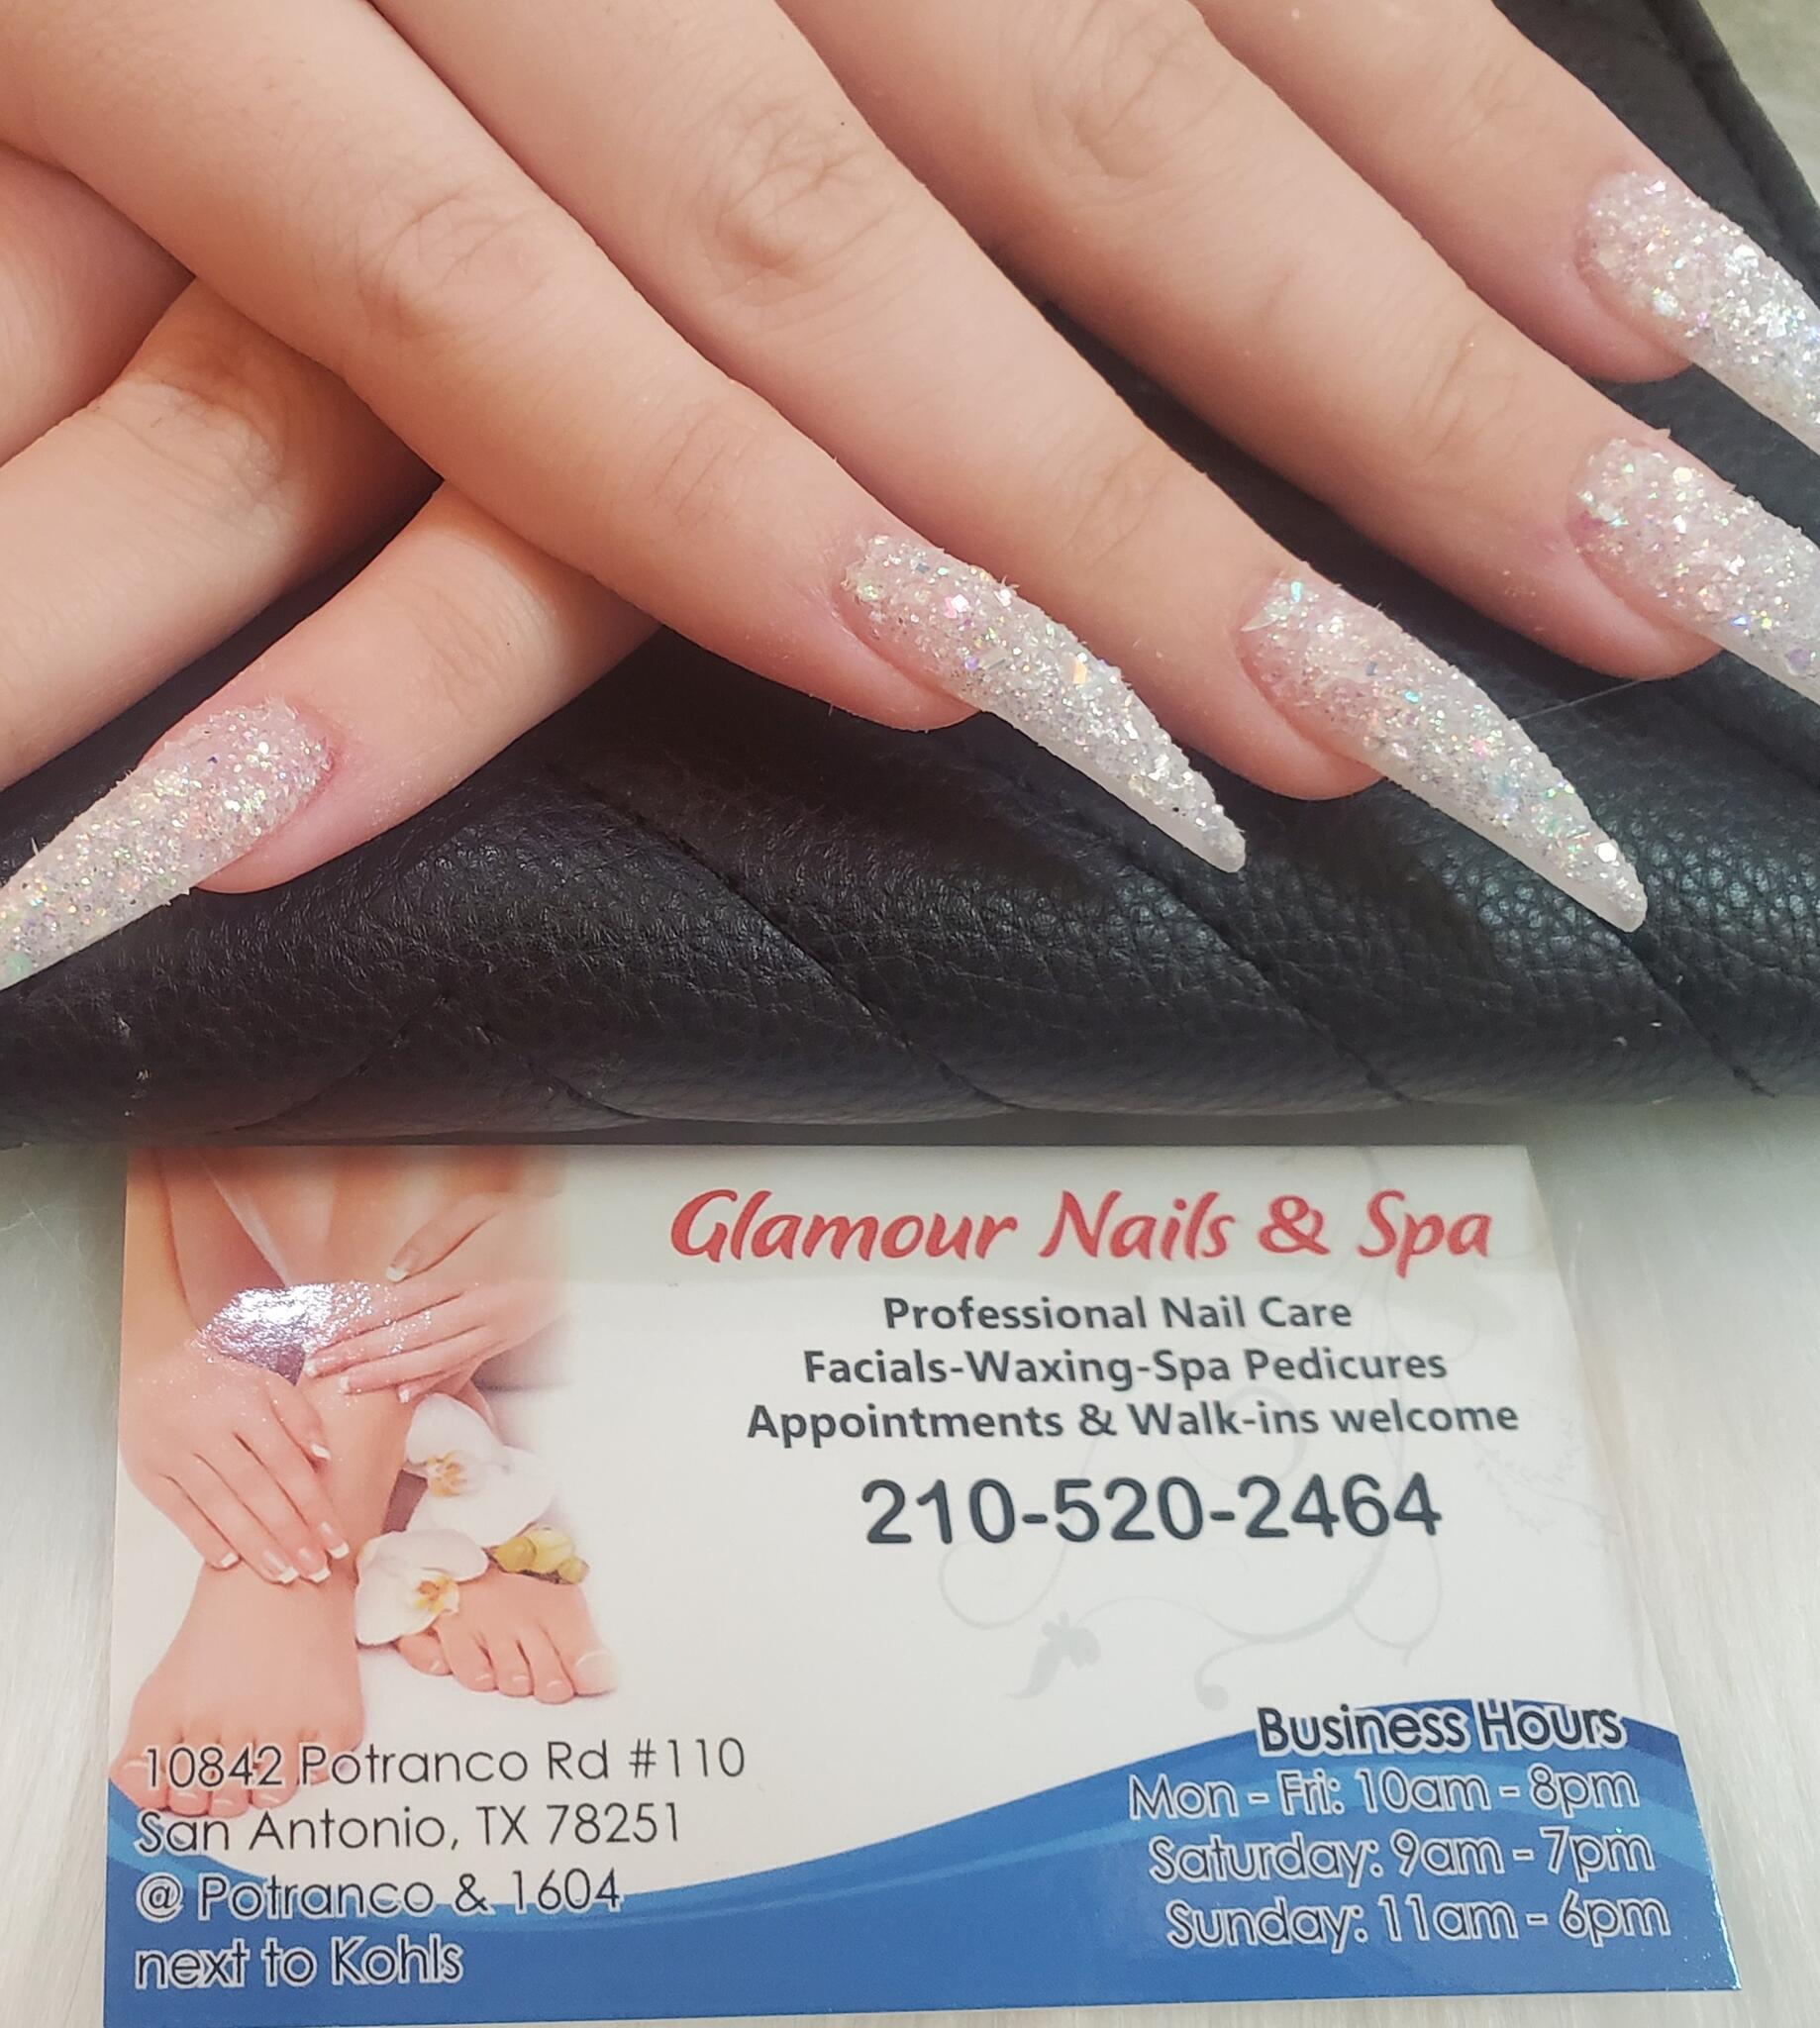 Glamour Nail and Spa Offers Acrylic Nails in Roswell, GA 30076